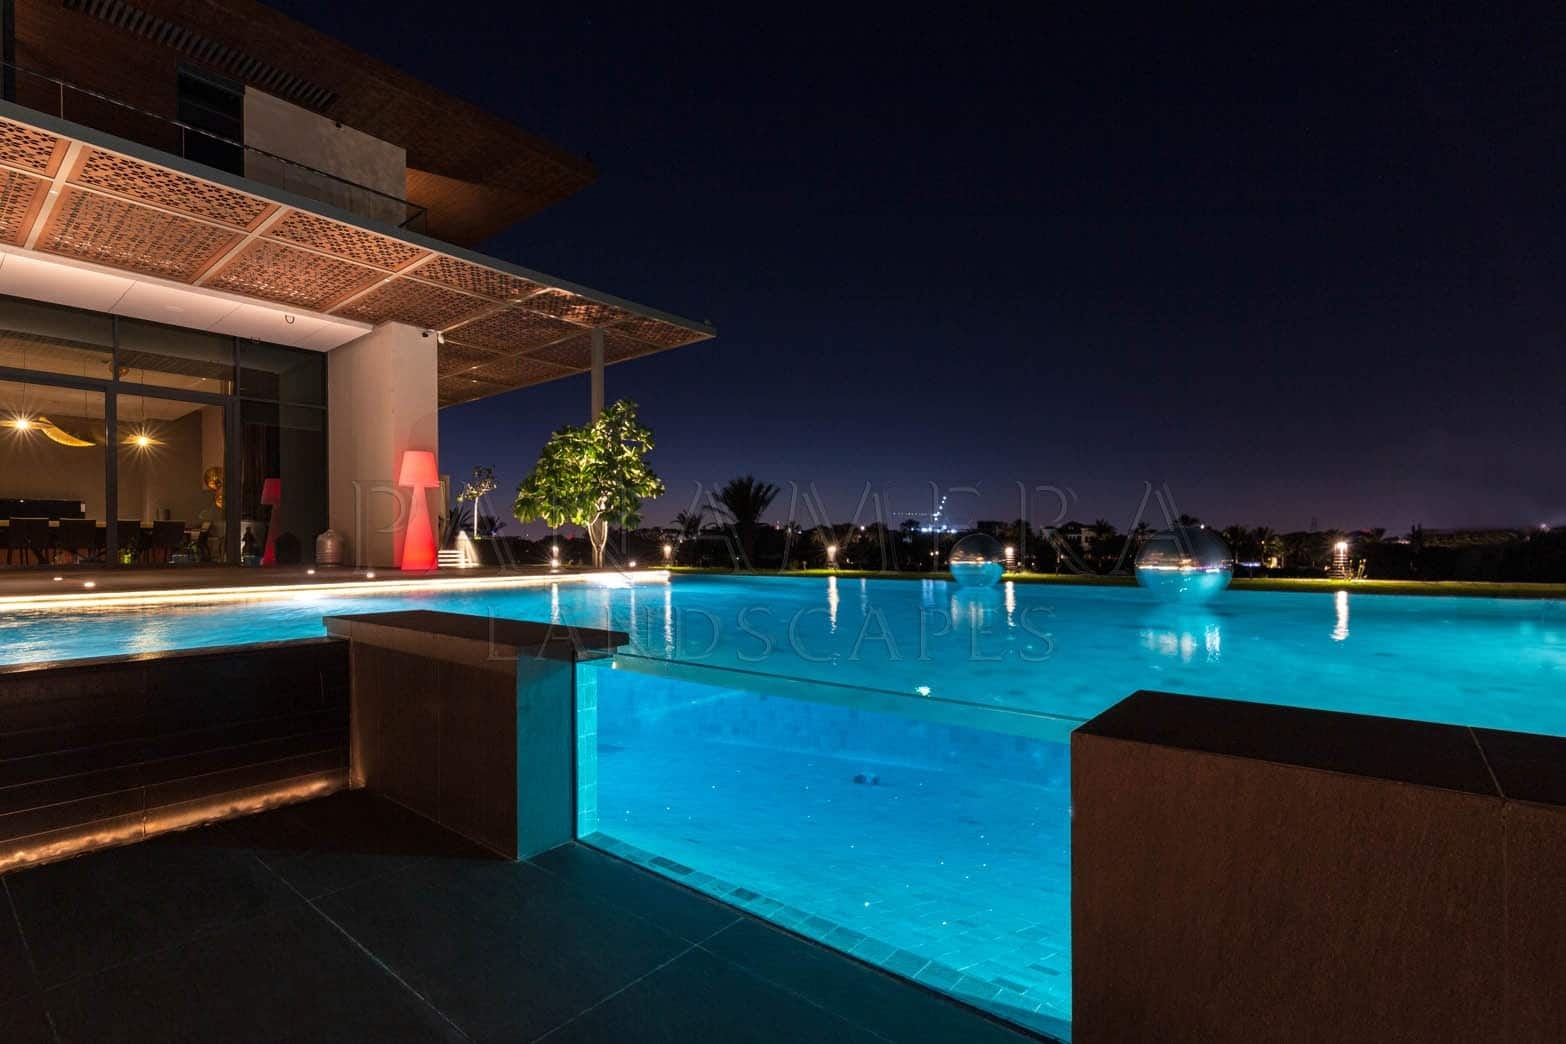 Acrylic Pools Dubai | One of the best landscaping companies in Dubai